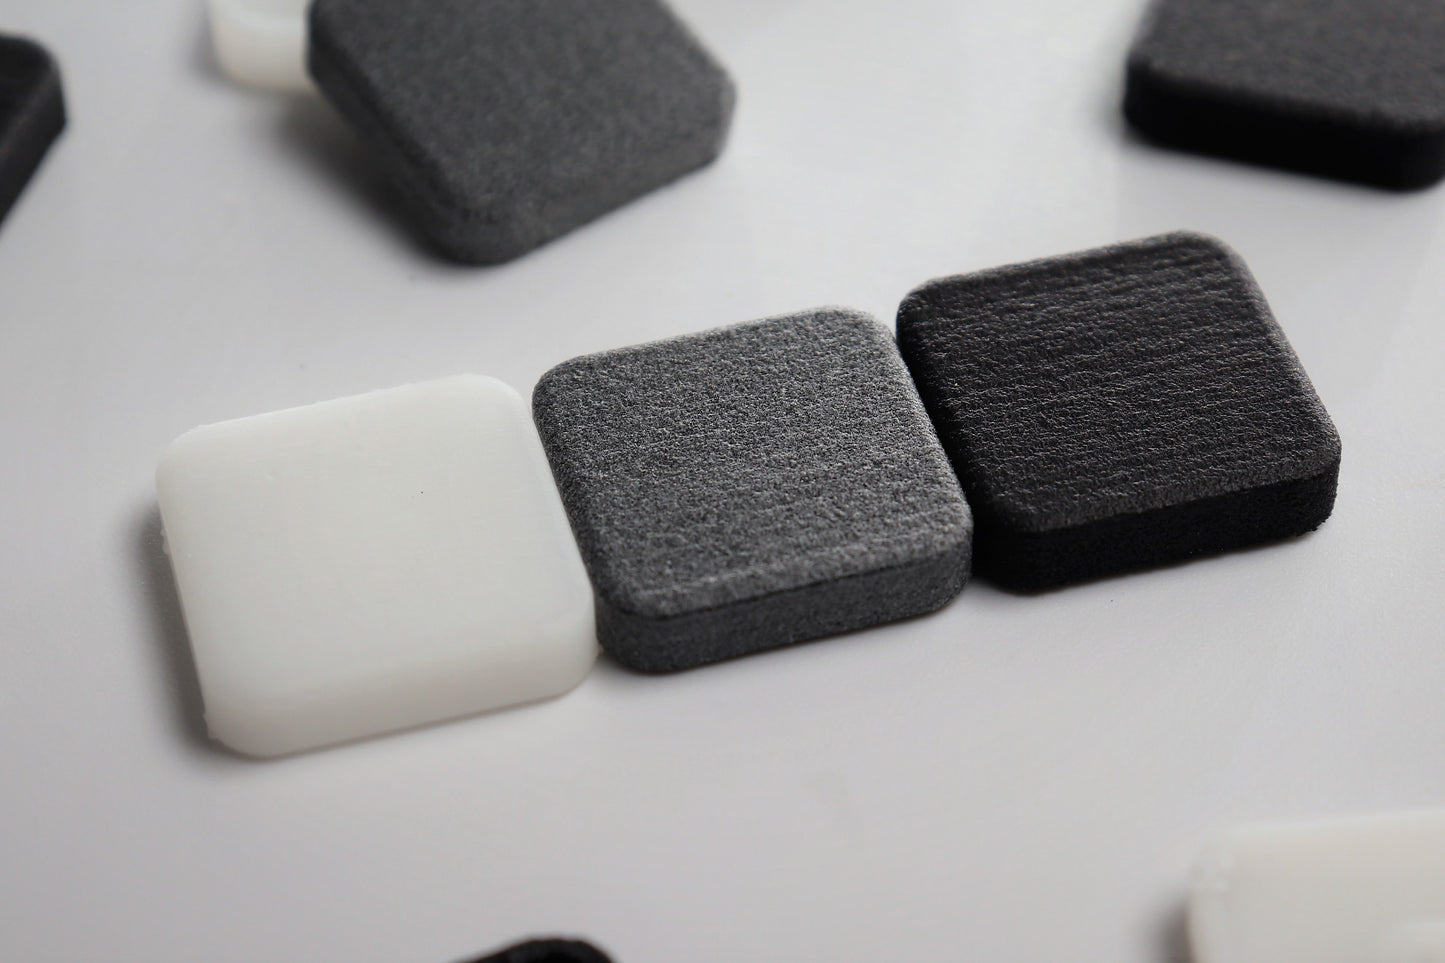 MX Low Profile Keycap set (Pack of 10 to 100)